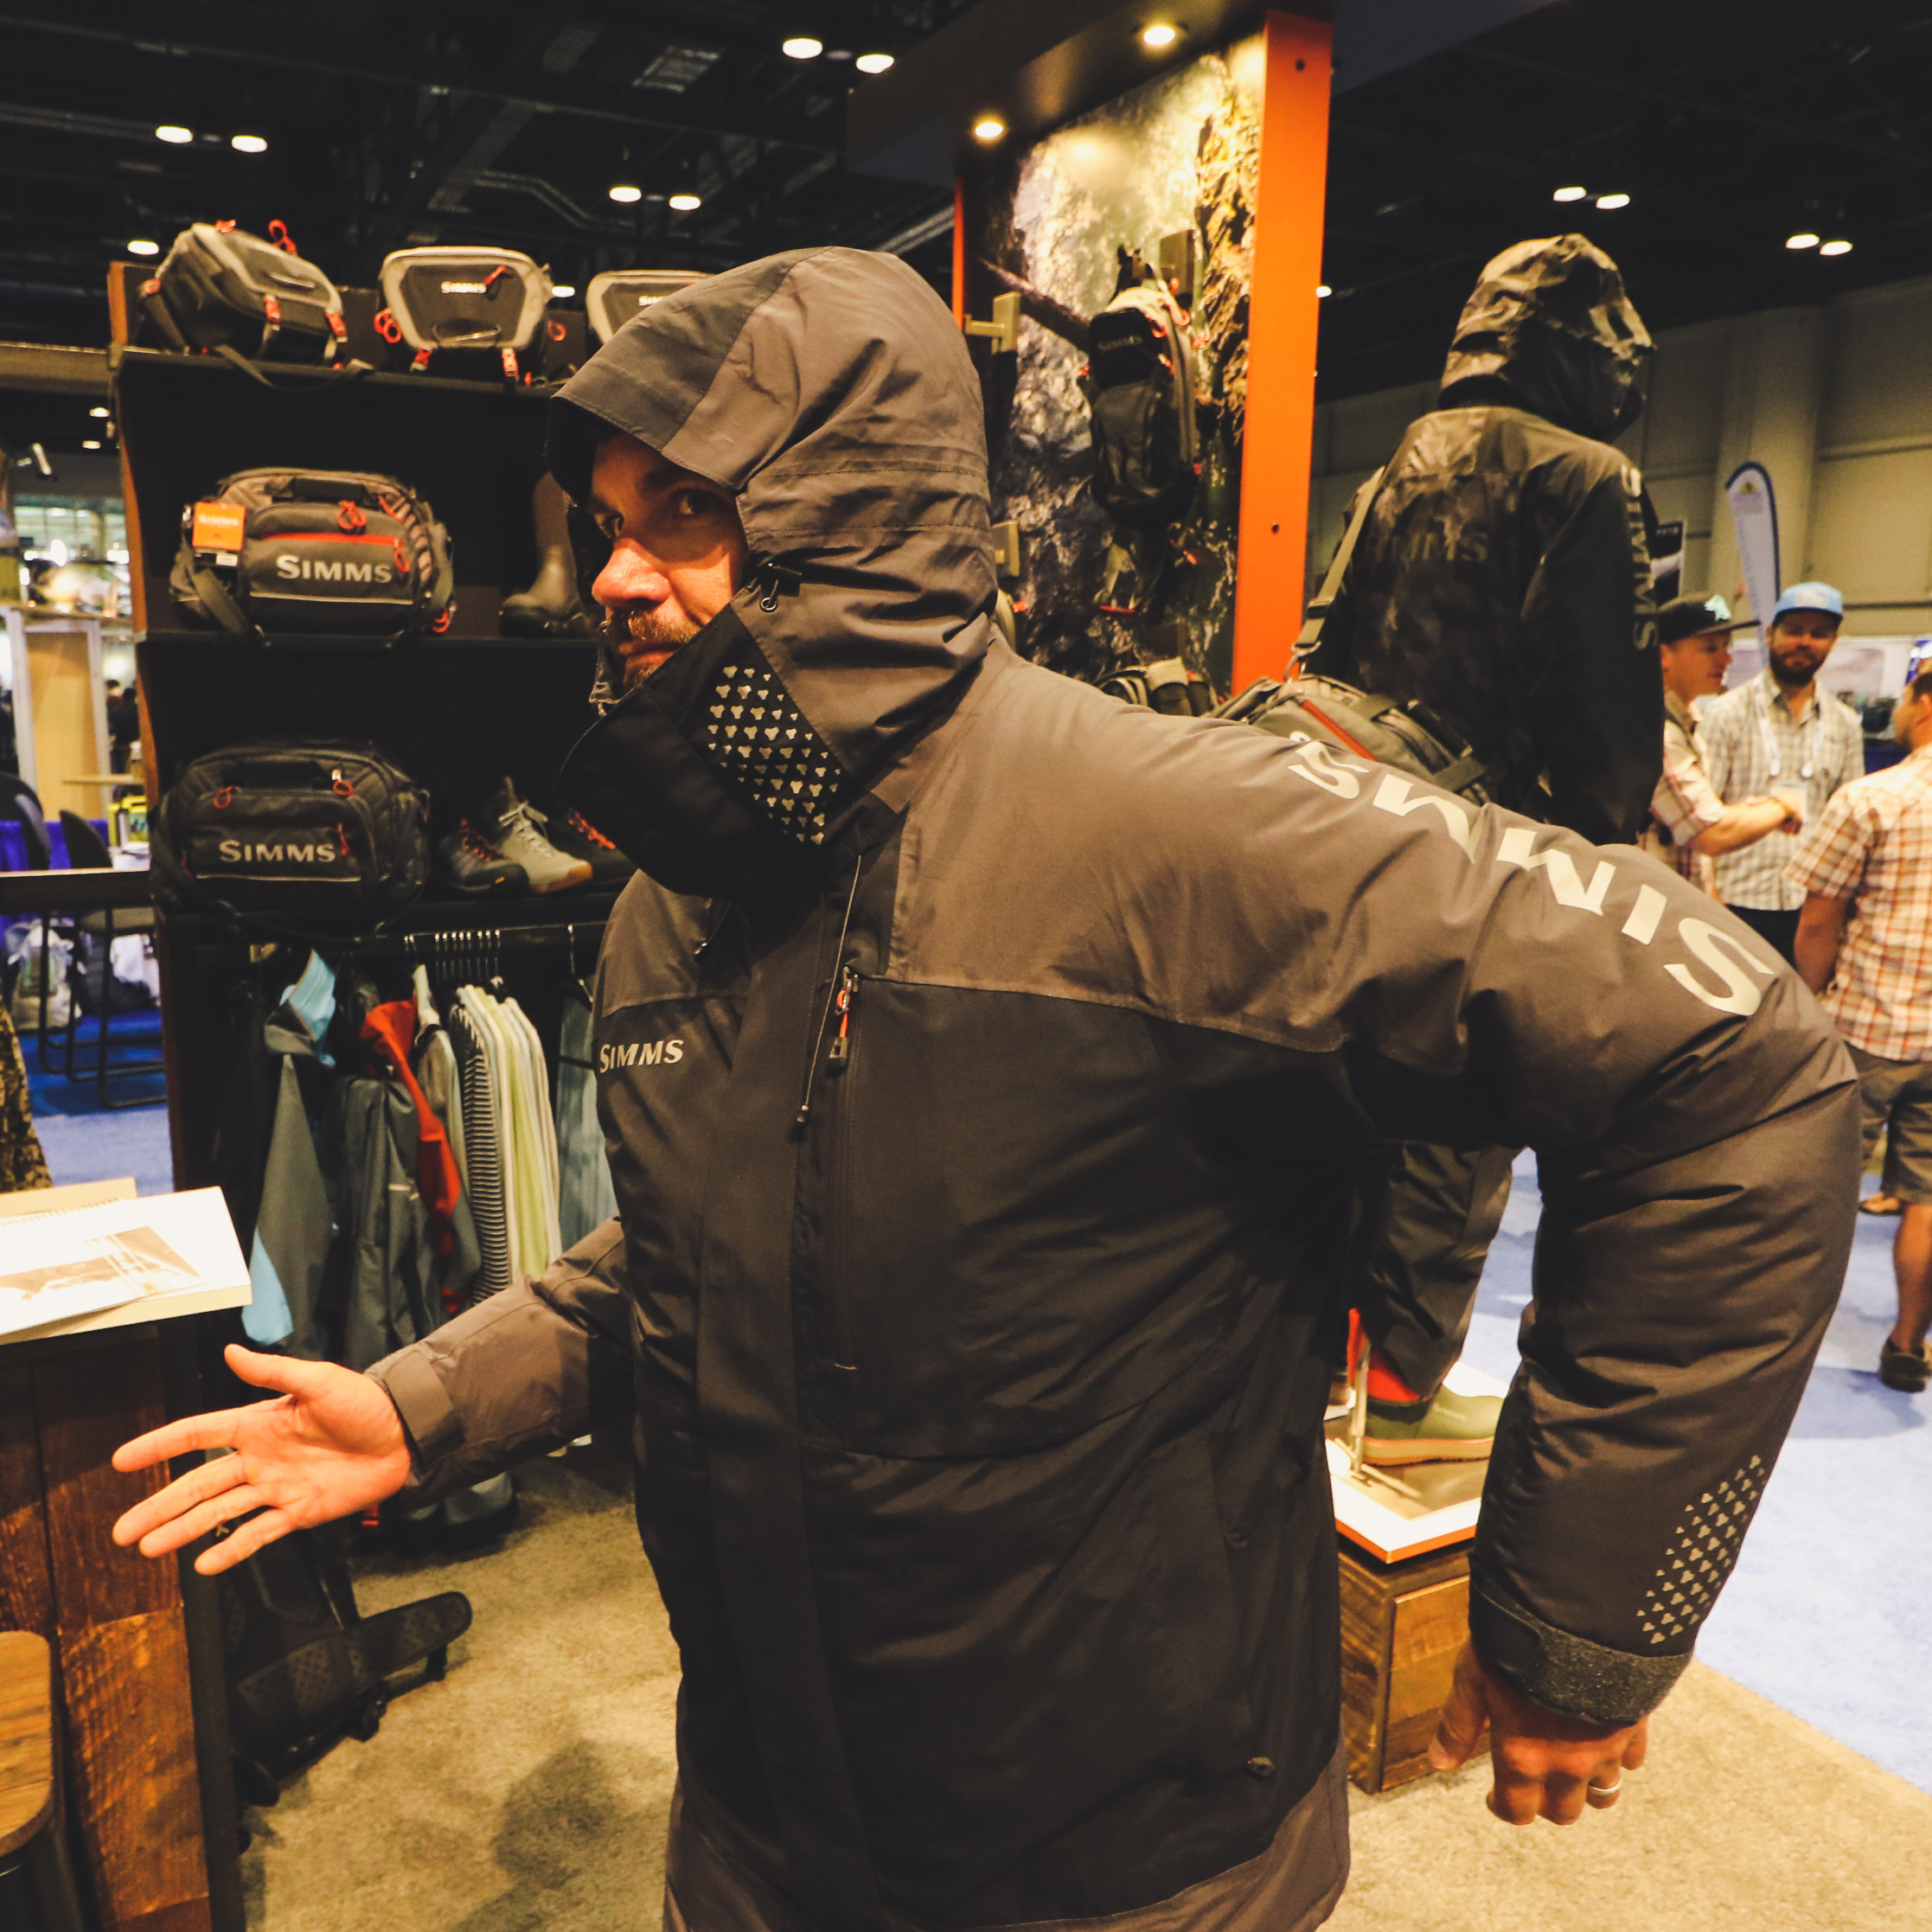 Win a SIMMS Challenger Insulated Jacket and Bib set!